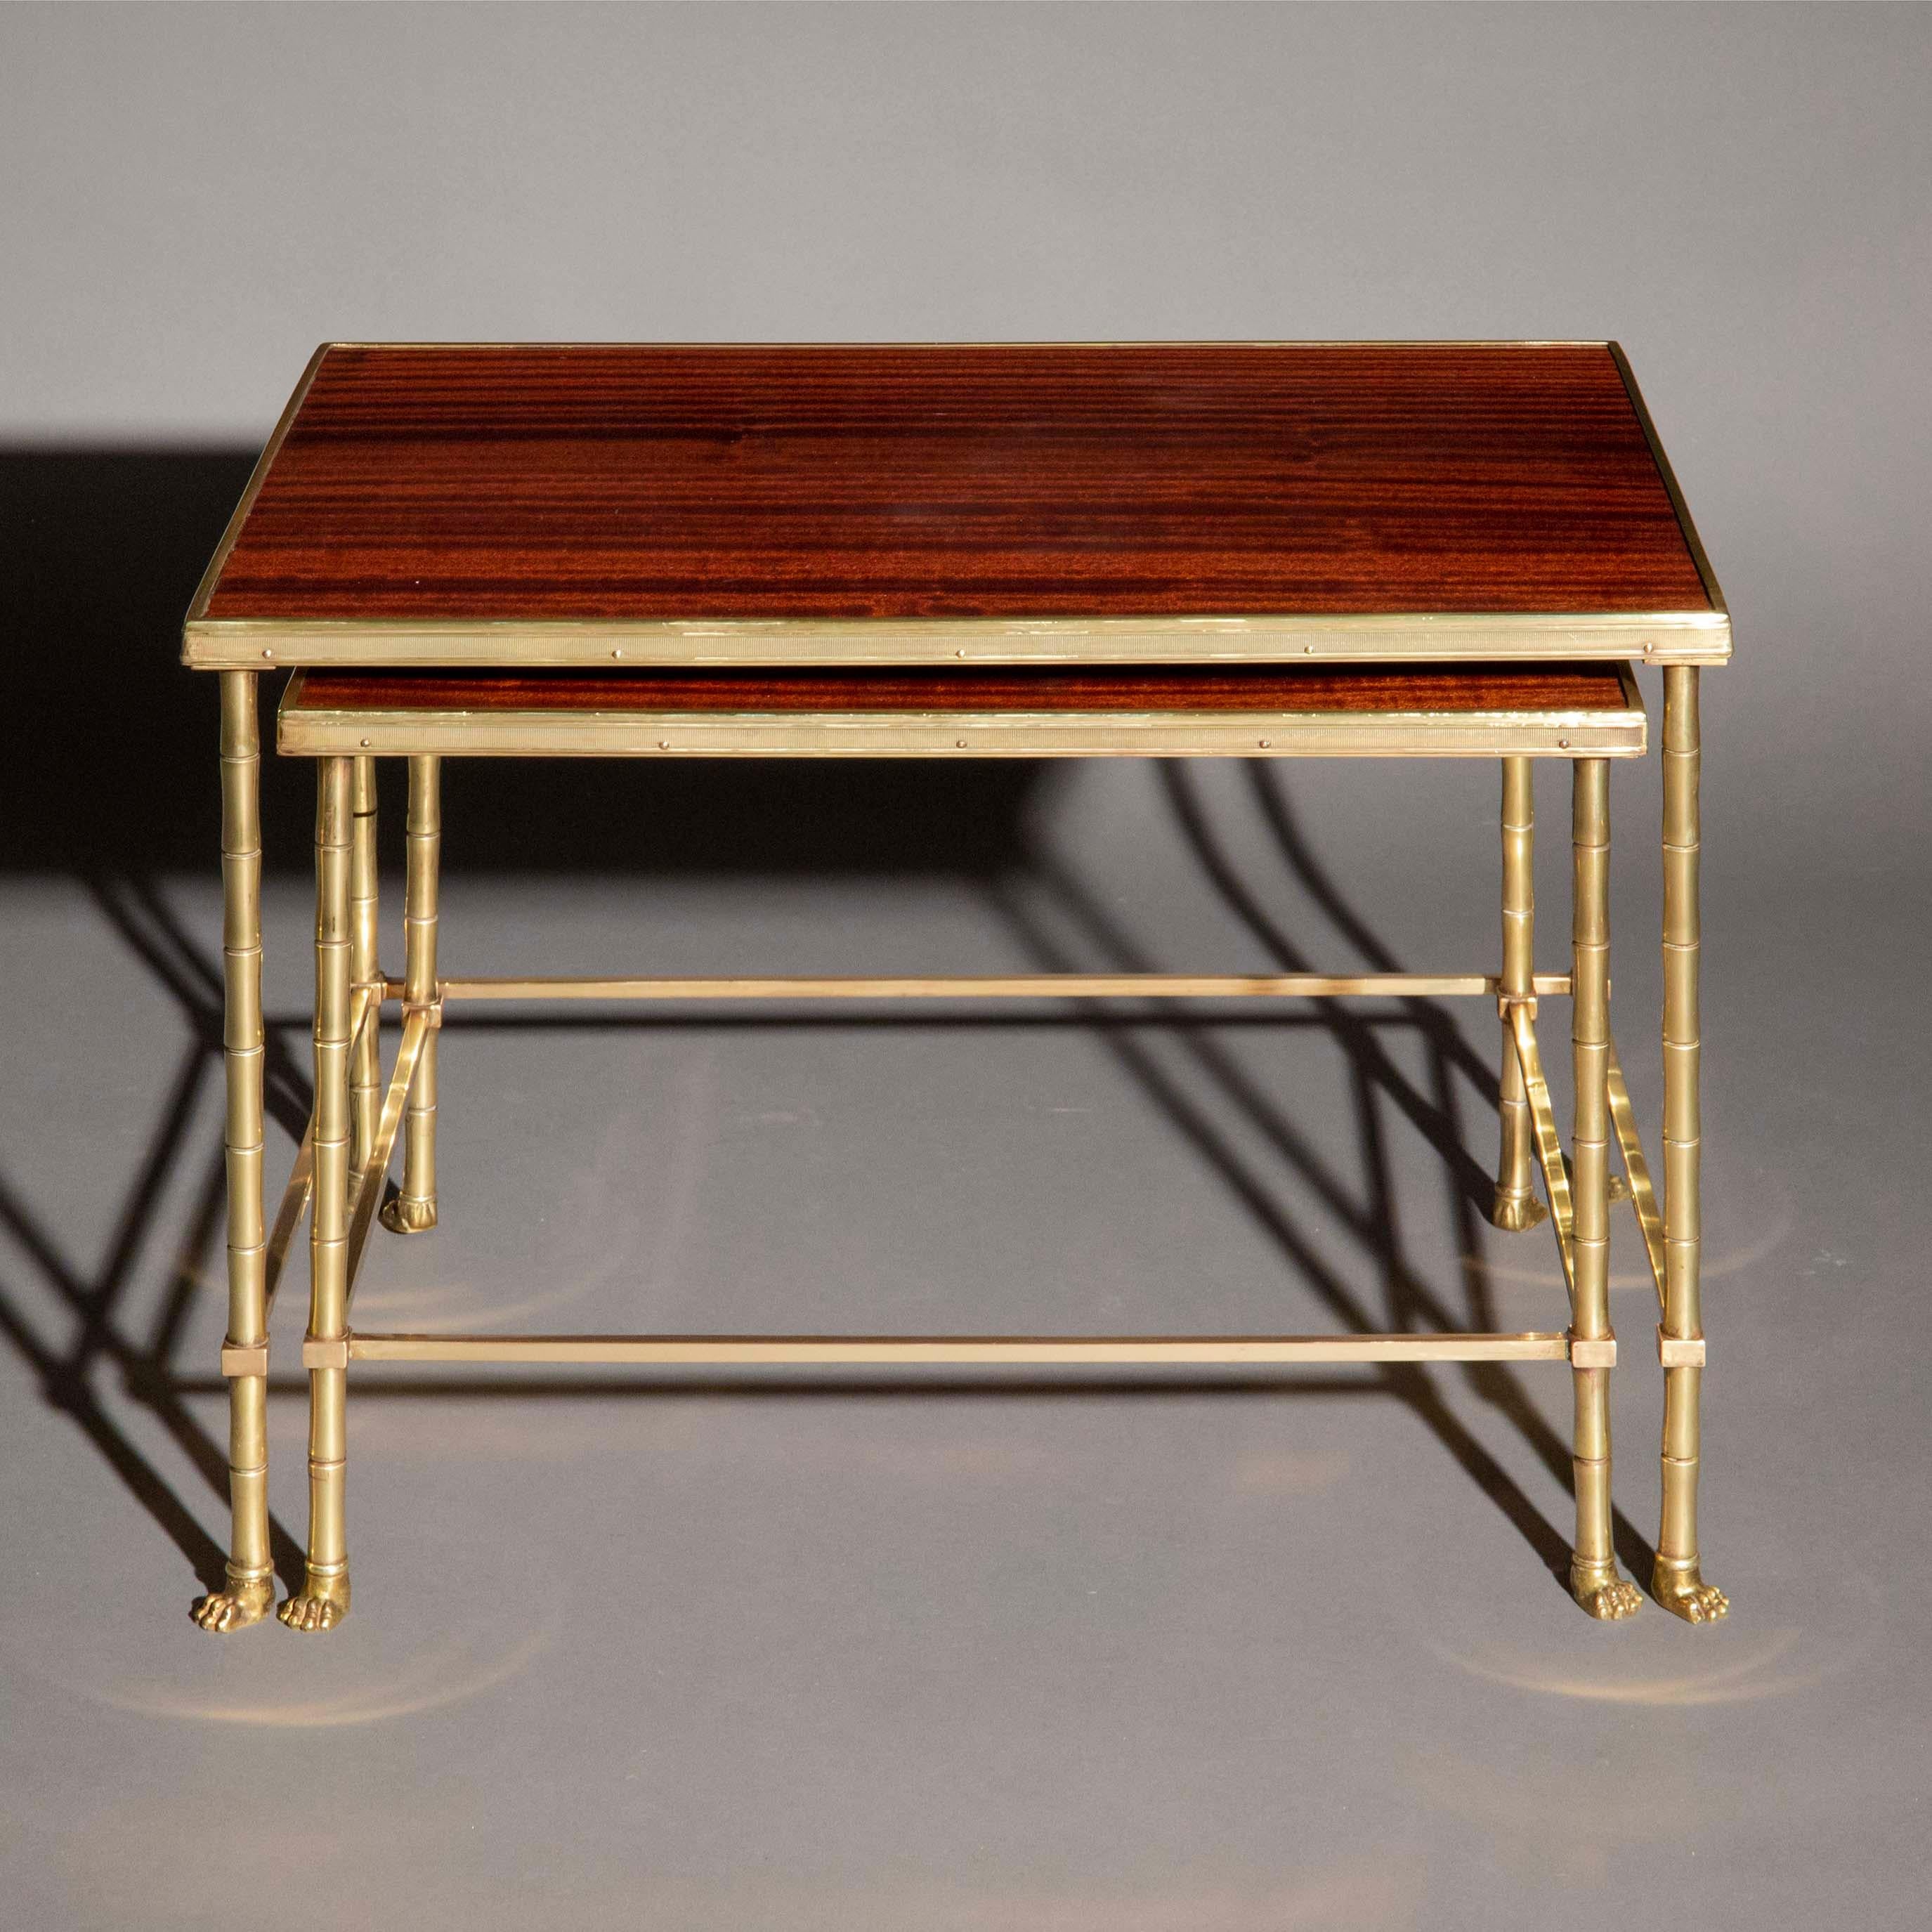 French Pair of Midcentury Brass Low Tables in the style of Maison Baguès